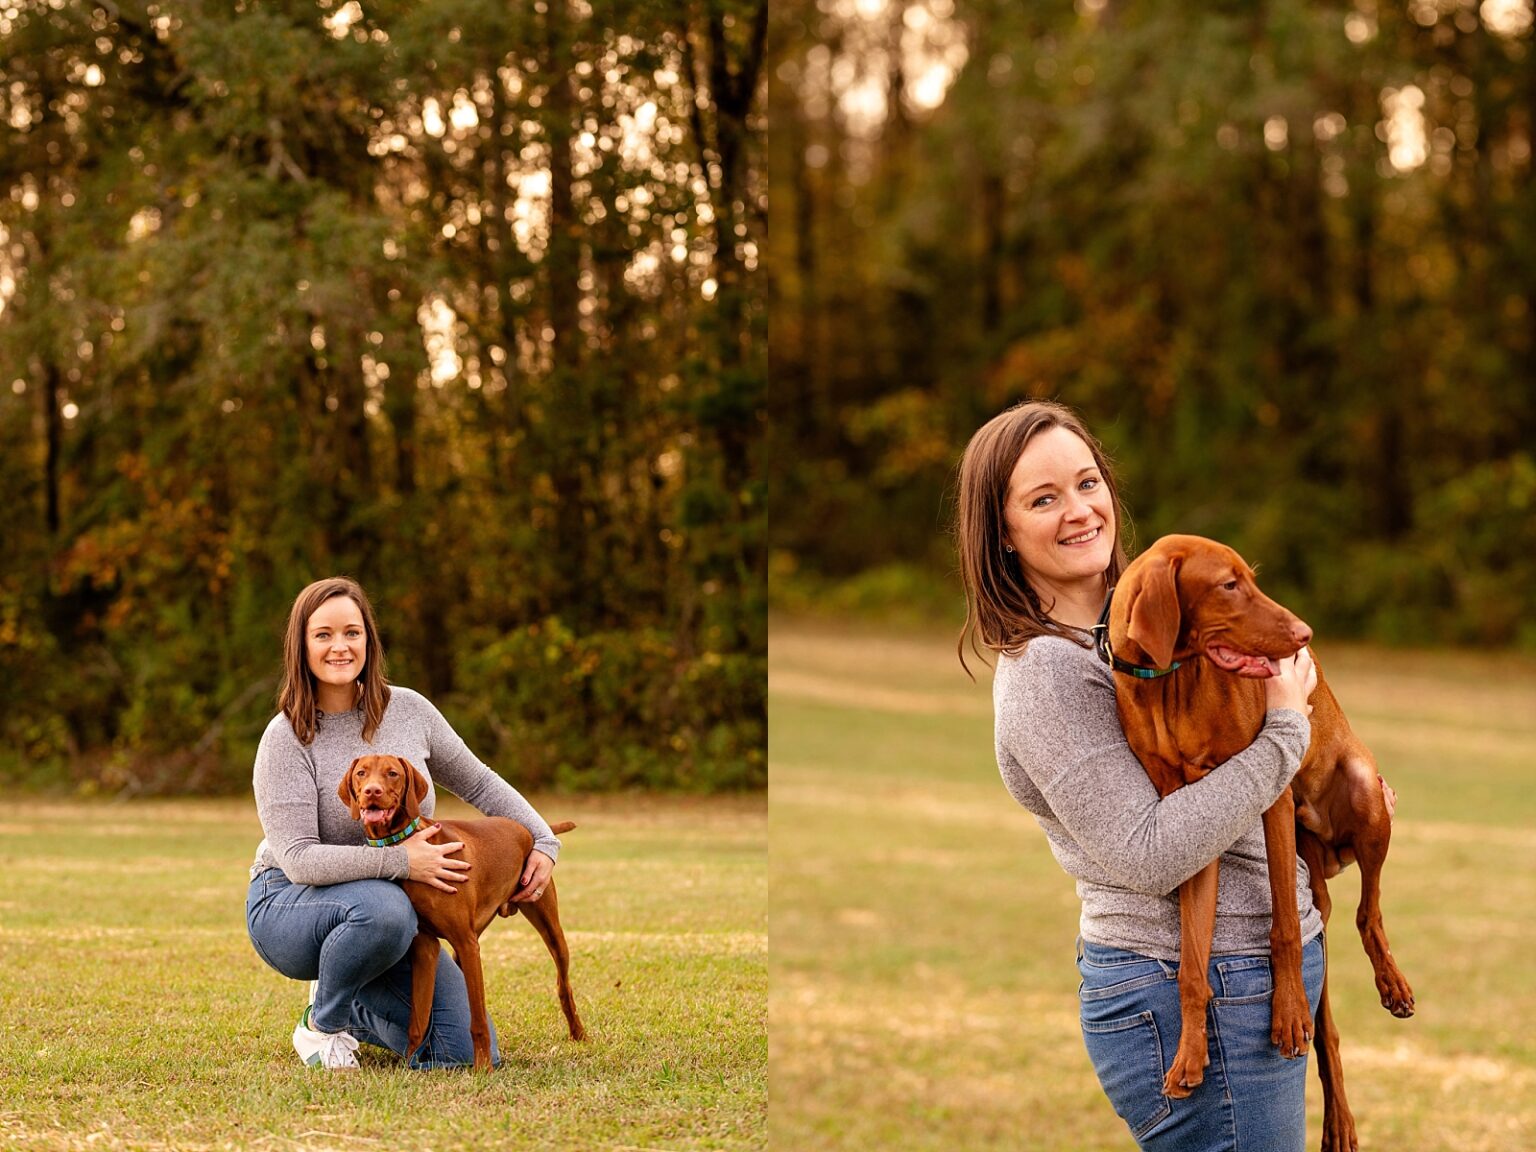 Horse and rider portrait photographer in Florida and the southeast. Photos with your horse and dog. Posing ideas for photos with dog and horse.